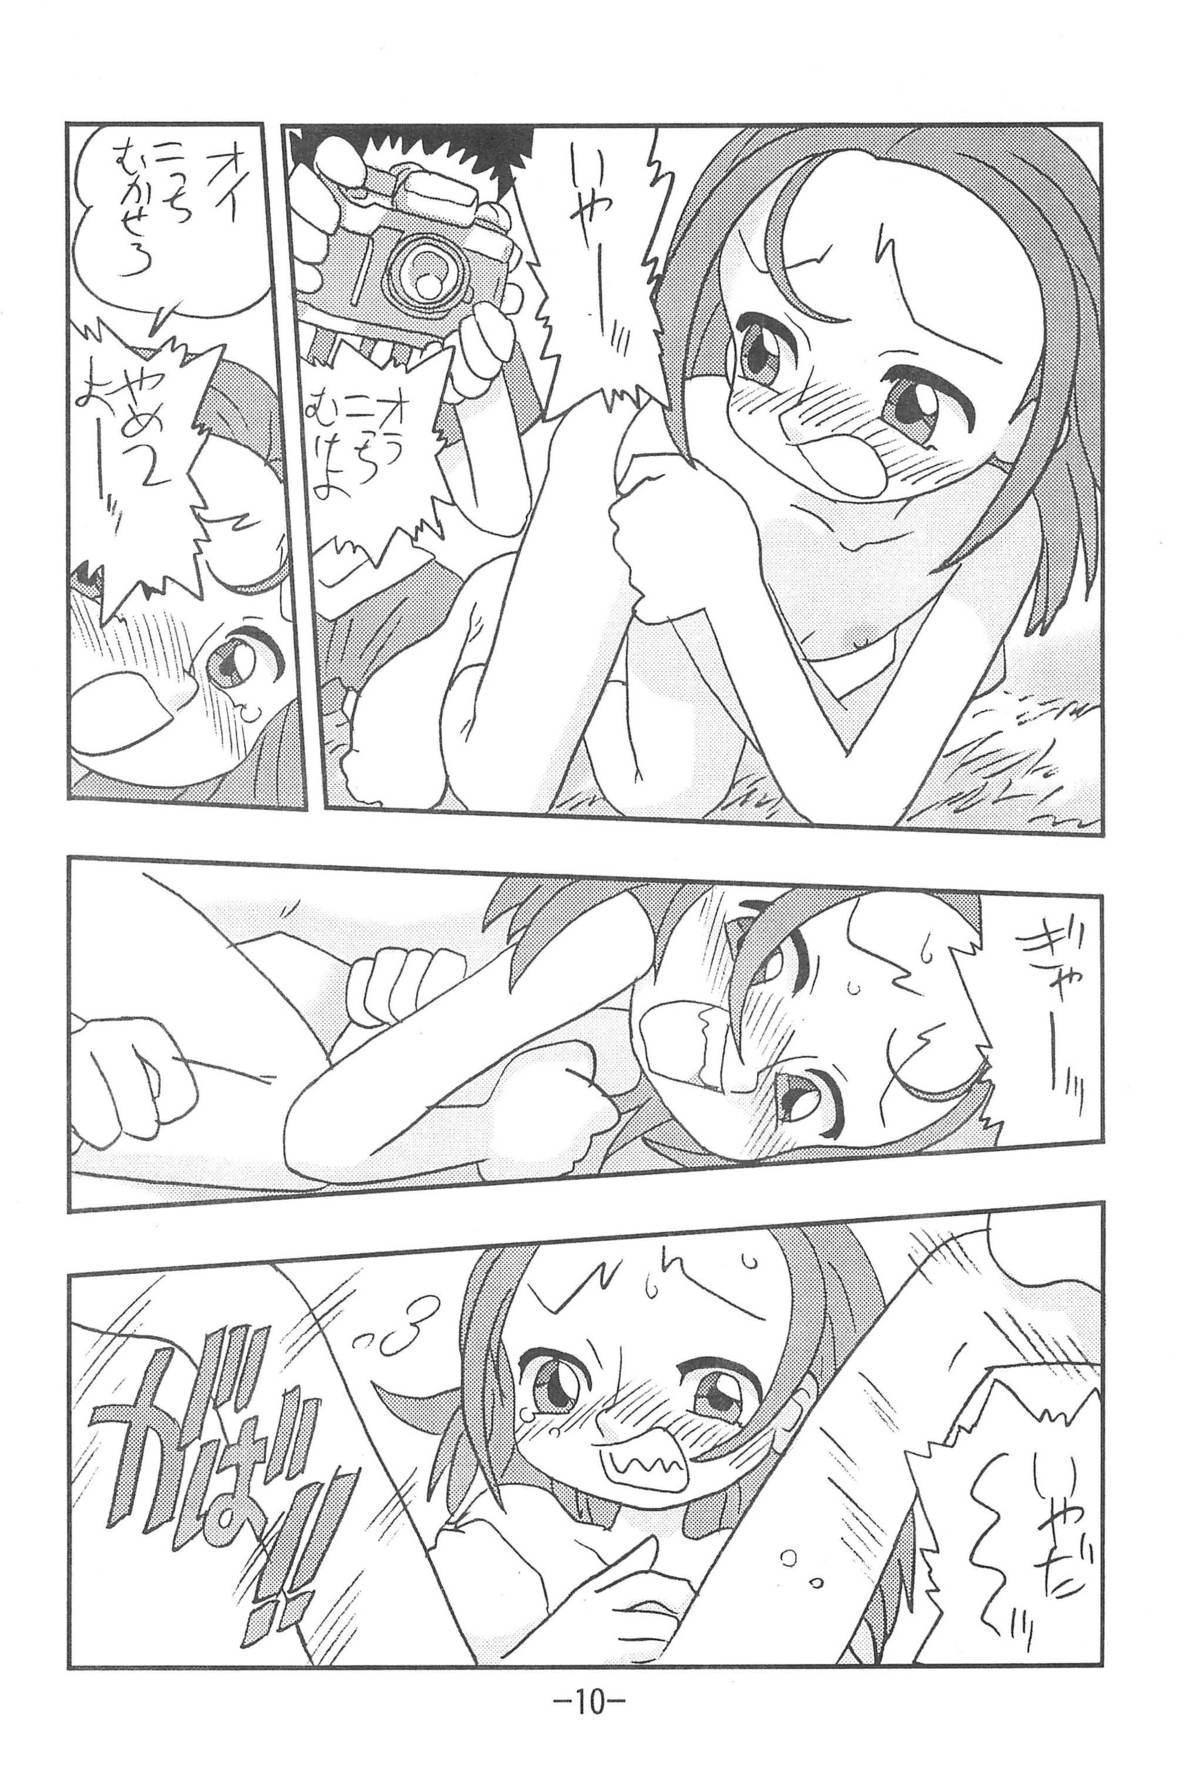 Face Fuck Scoop is my Business - Ojamajo doremi Girlfriends - Page 10